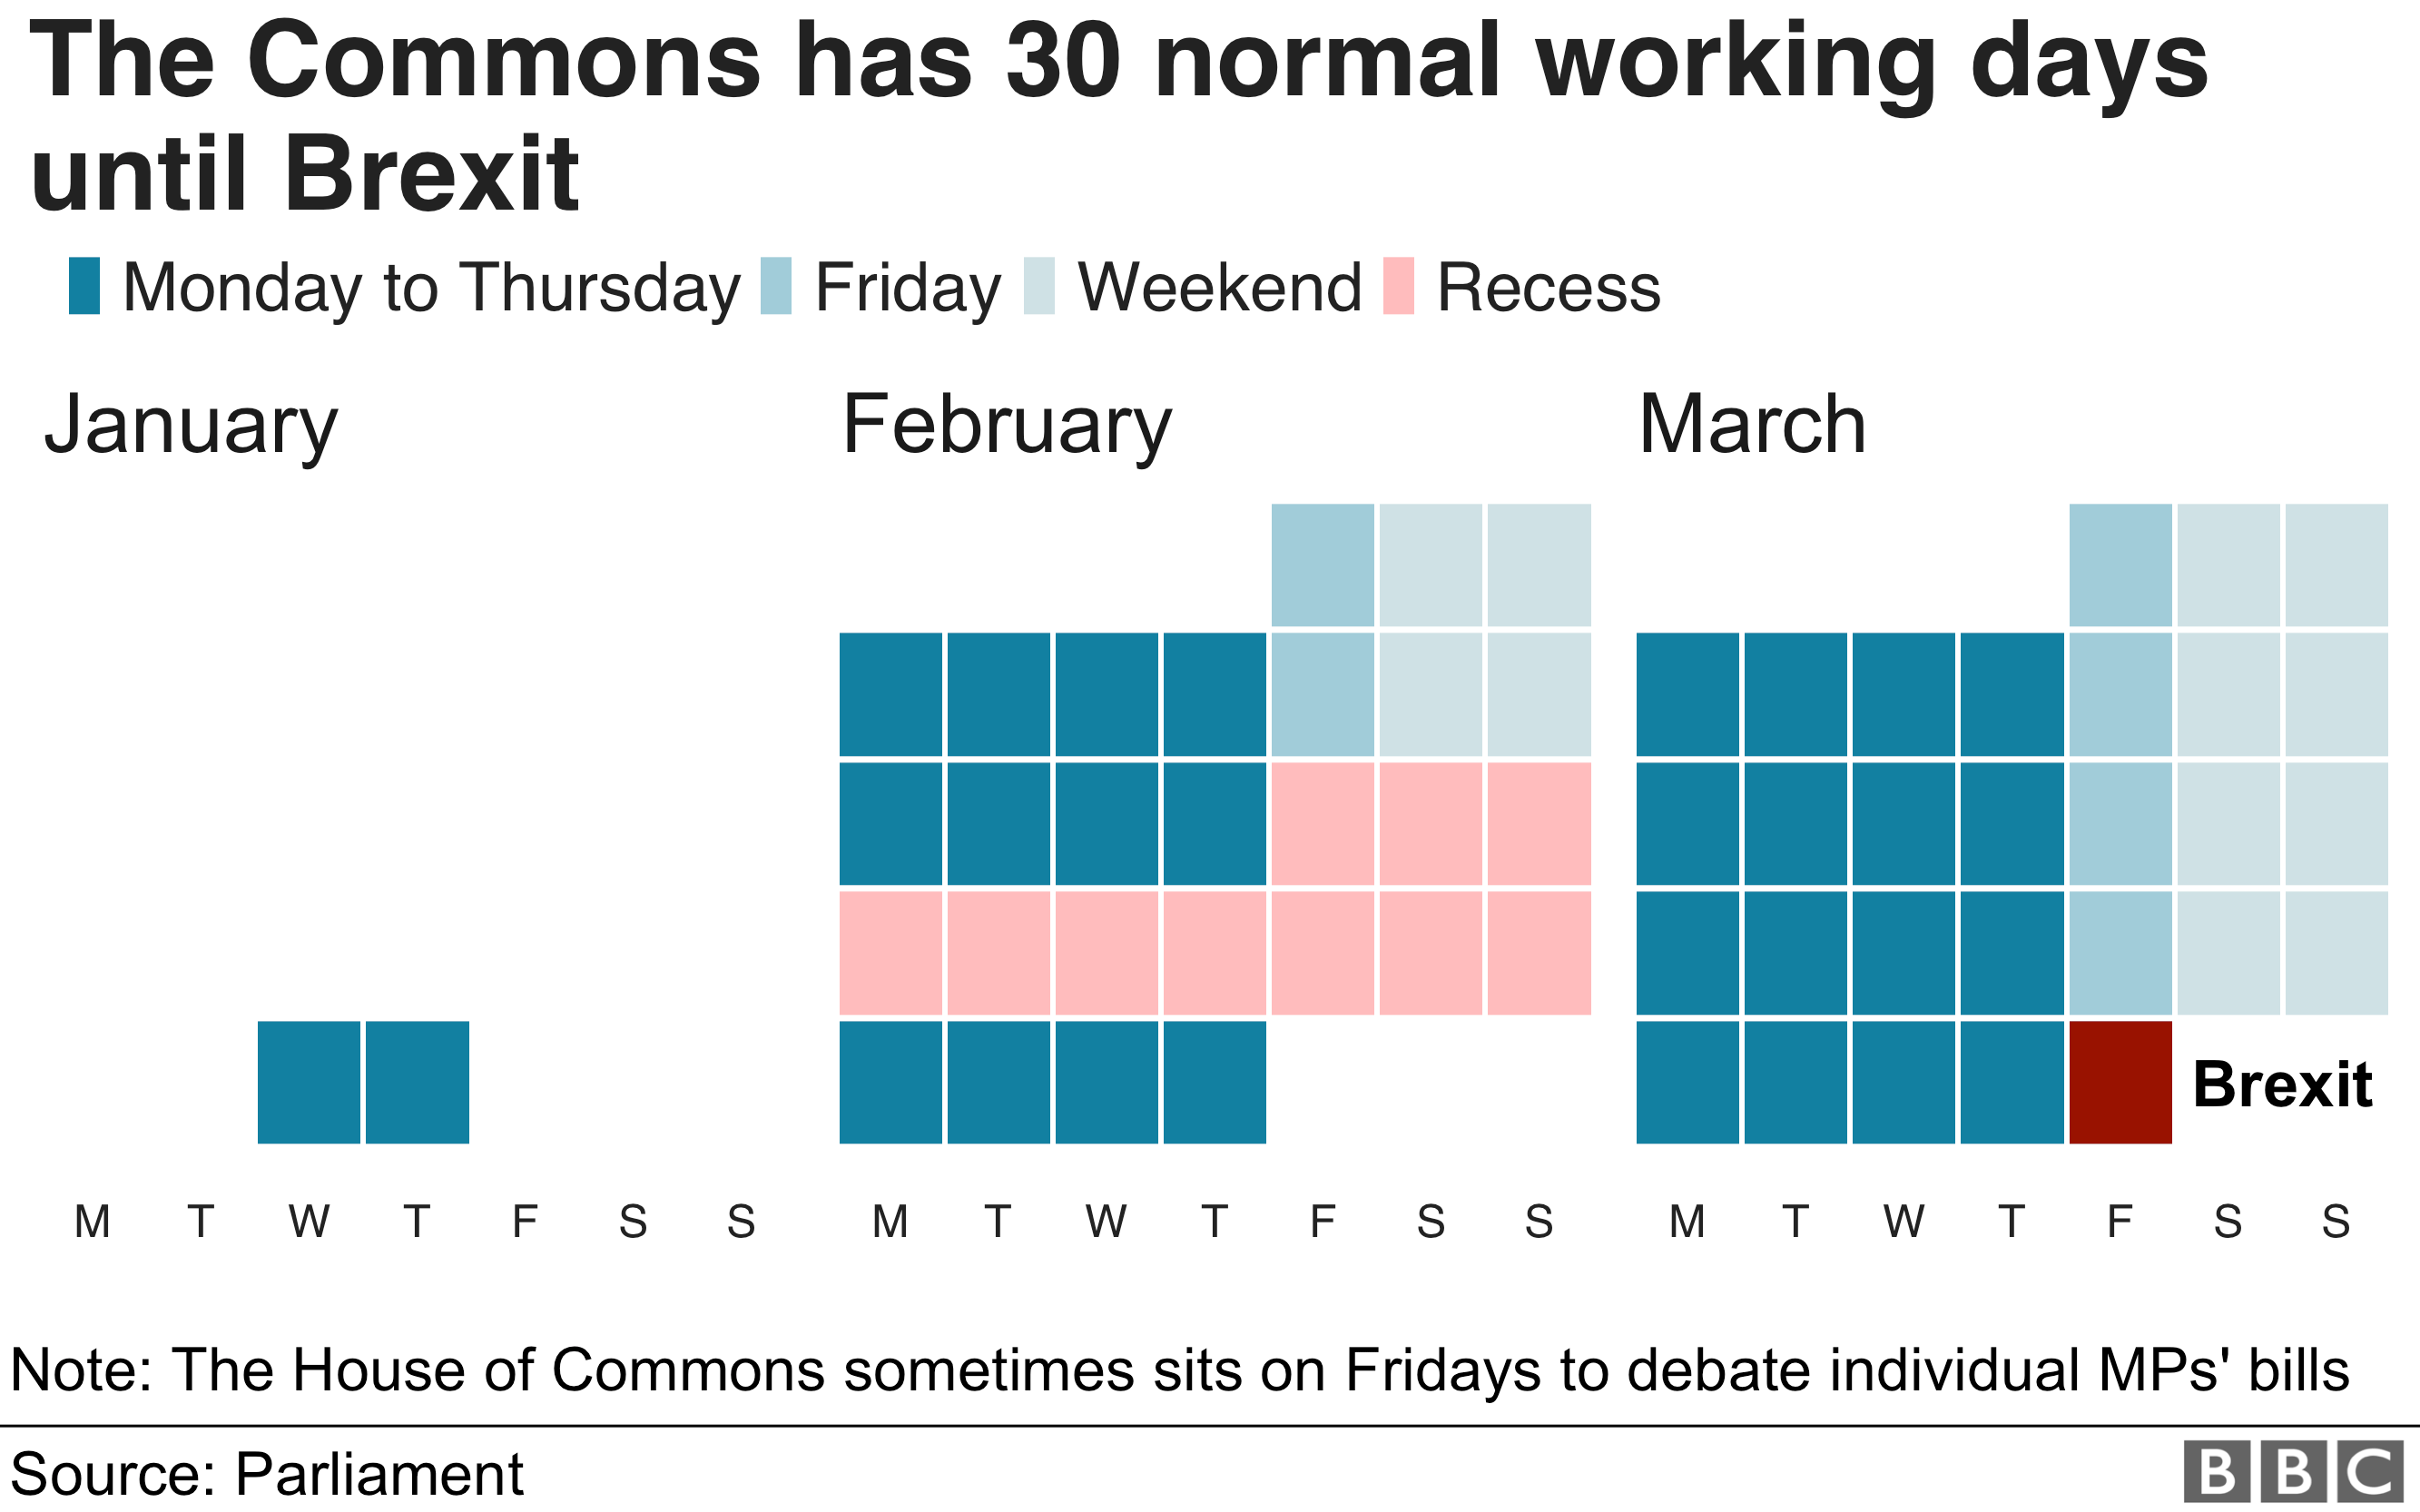 BBC graphic showing the number of working days until Brexit